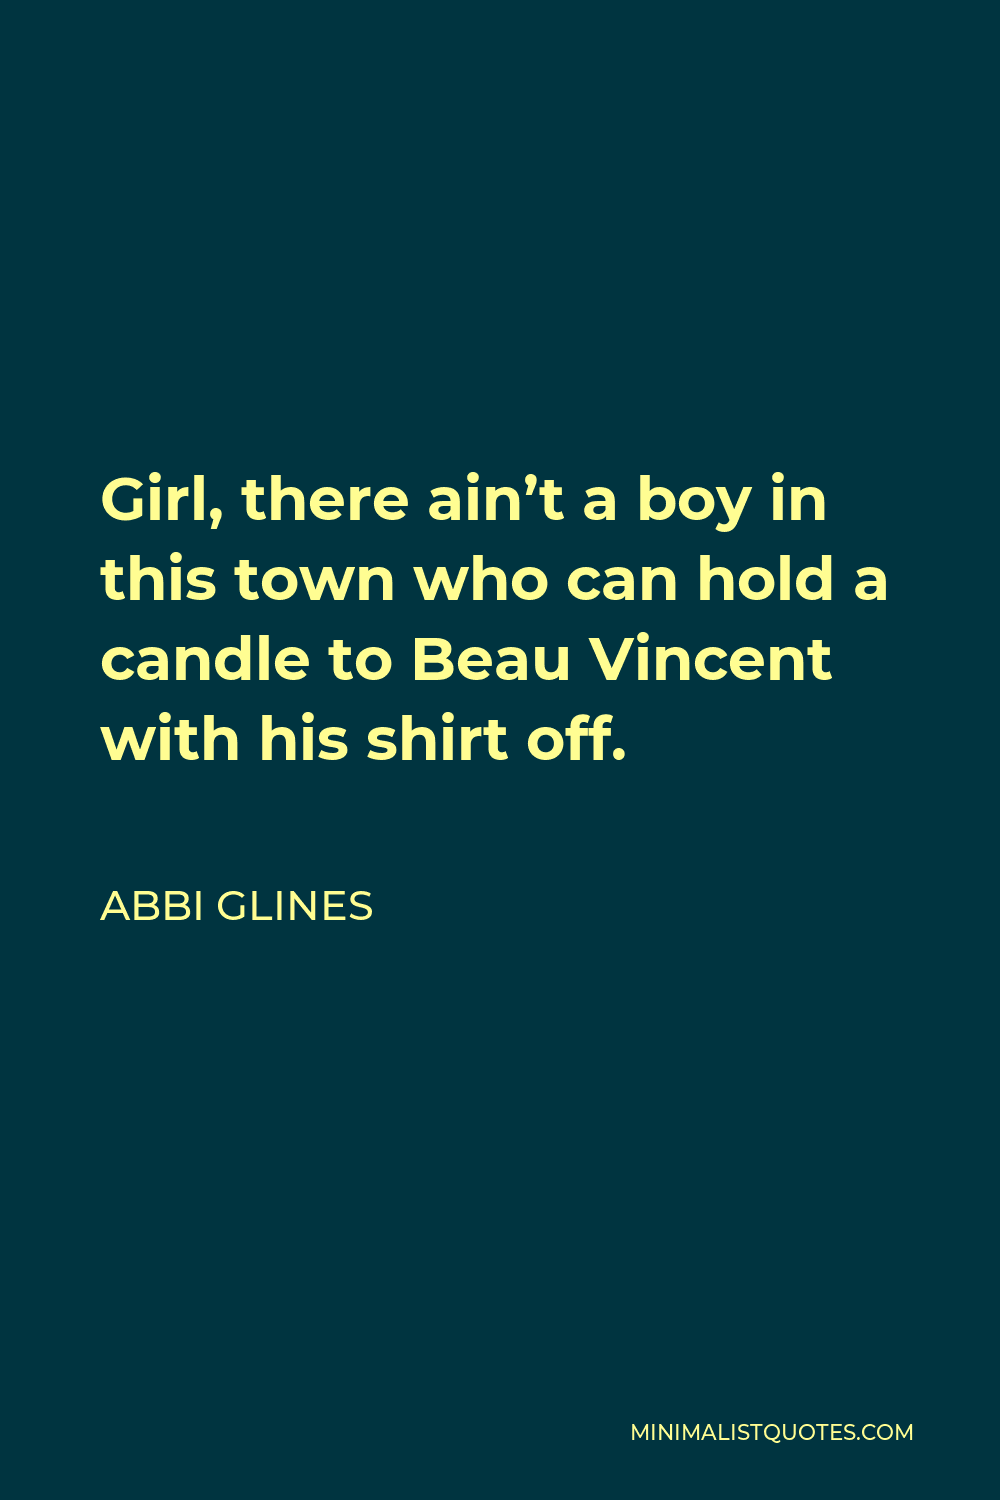 Abbi Glines Quote - Girl, there ain’t a boy in this town who can hold a candle to Beau Vincent with his shirt off.